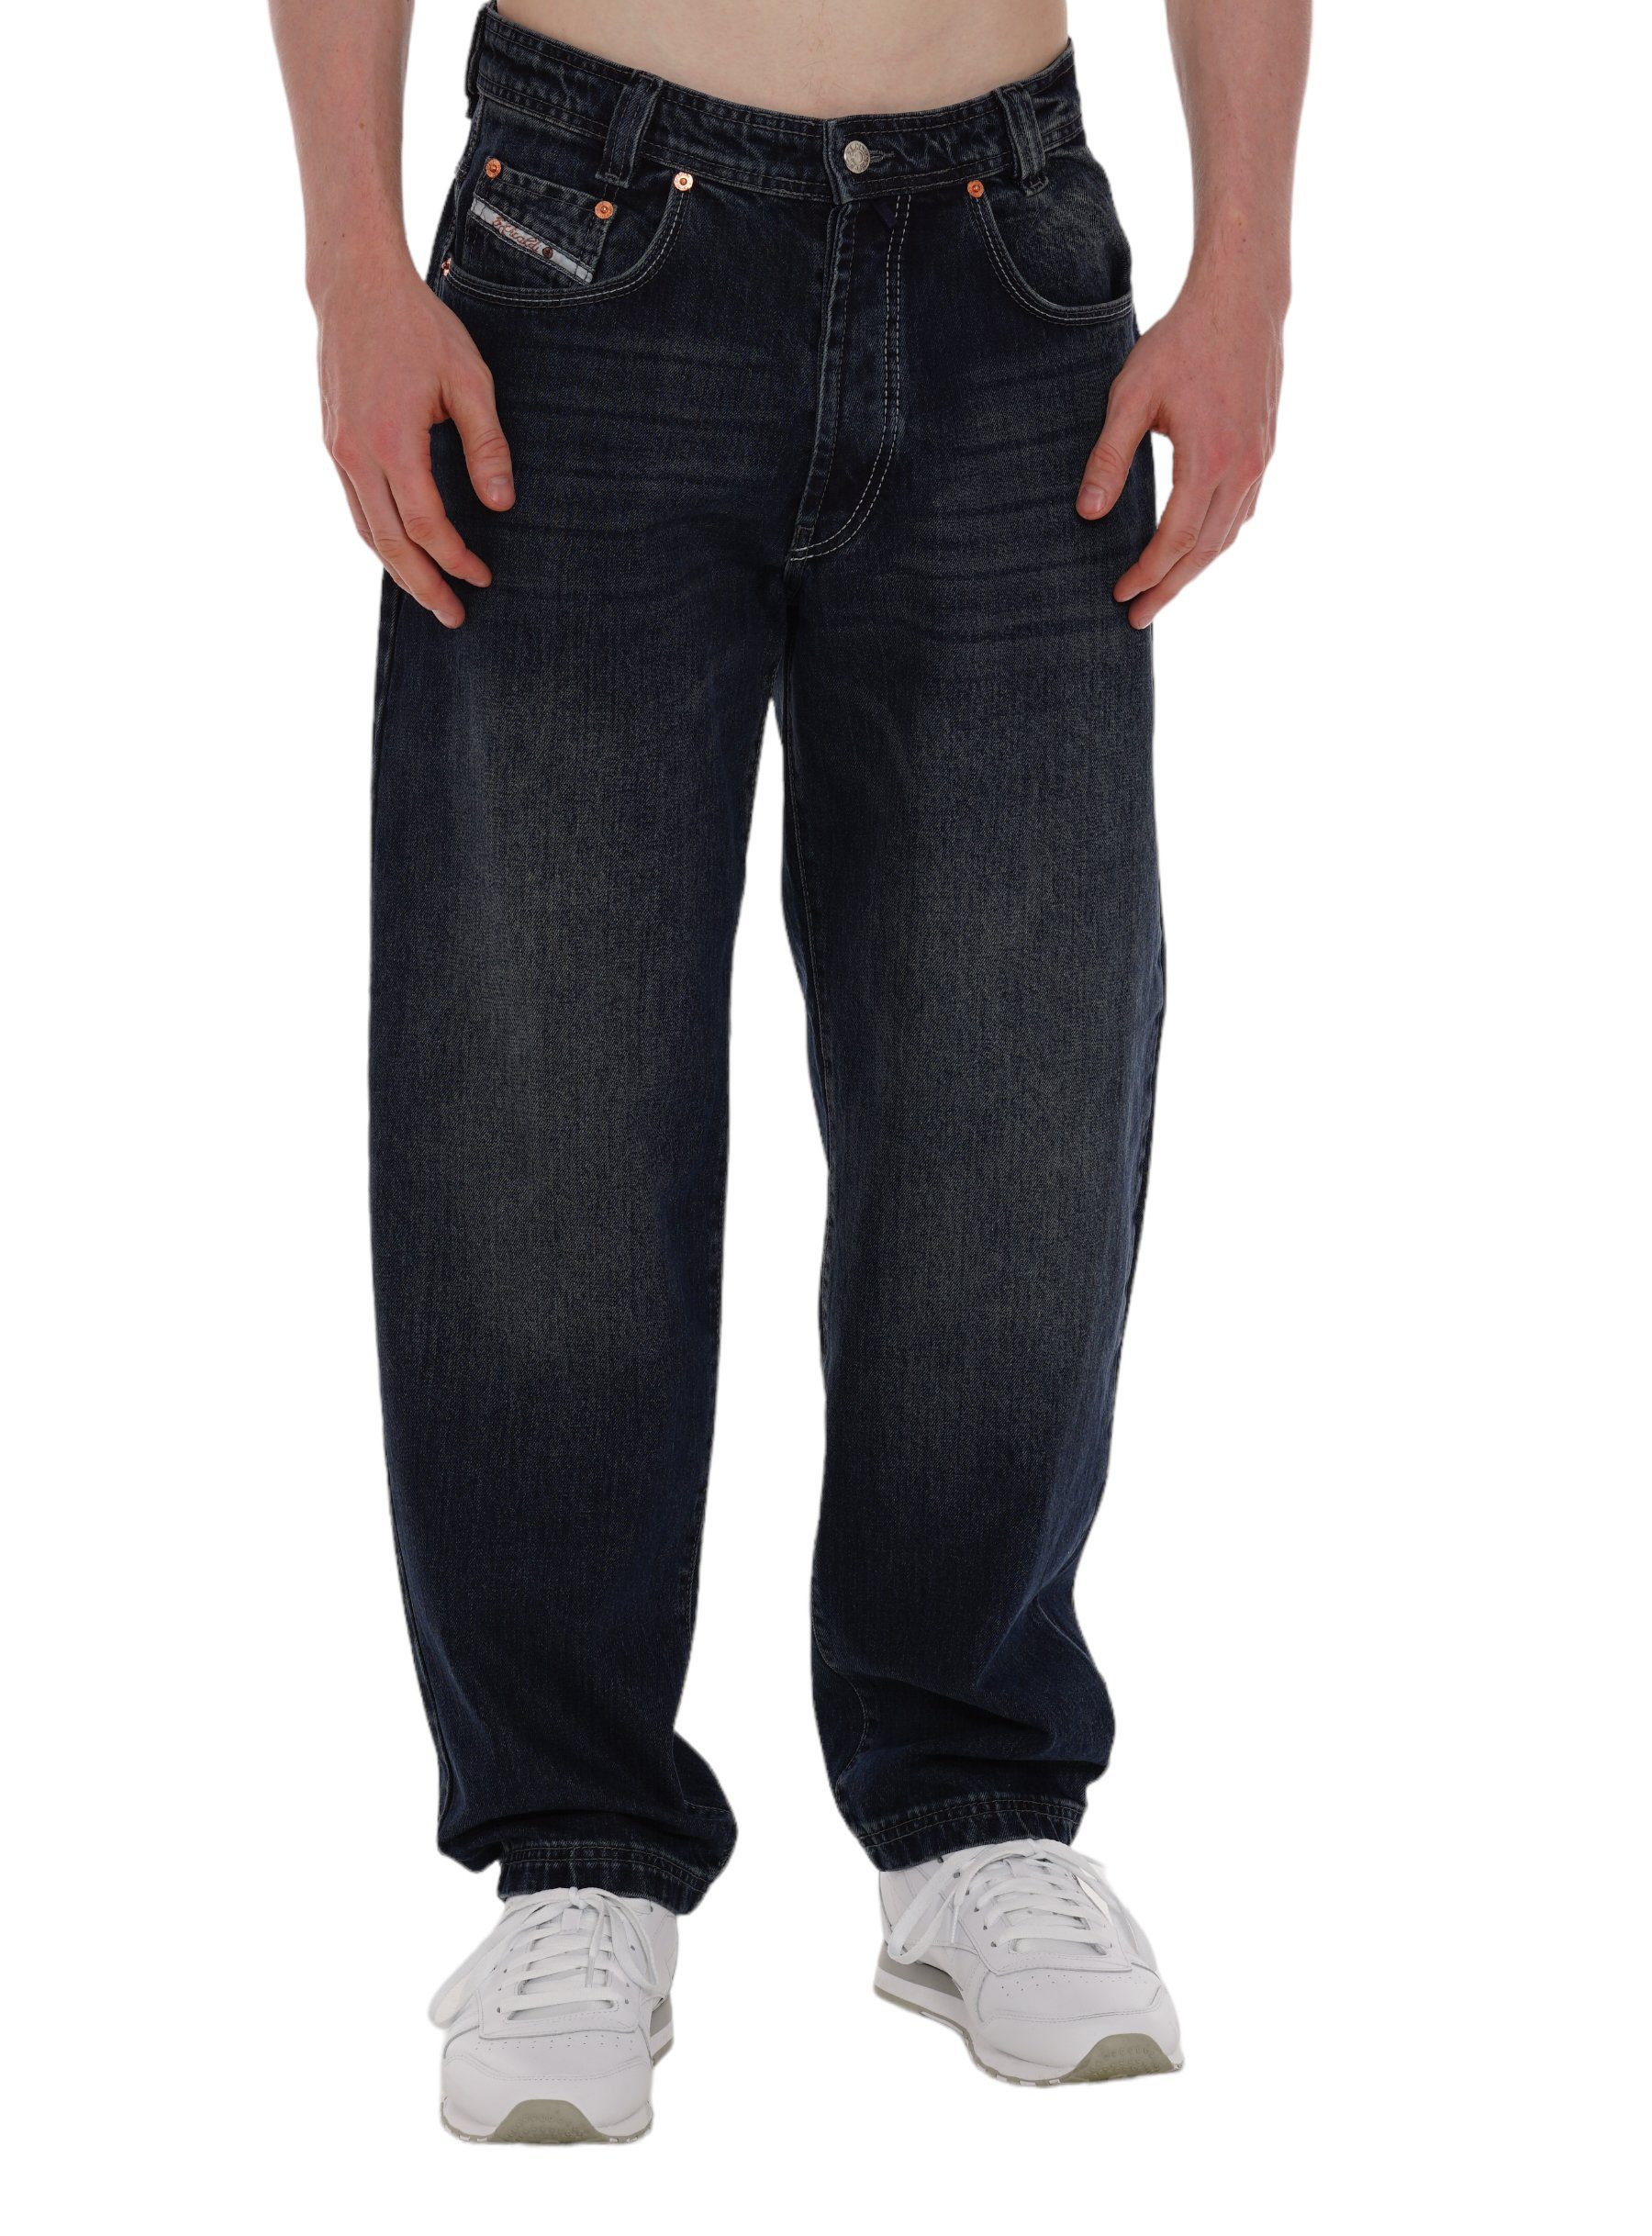 PICALDI Jeans Weite Jeans Zicco 471 Loose Fit, Five Pocket Jeans Miracle